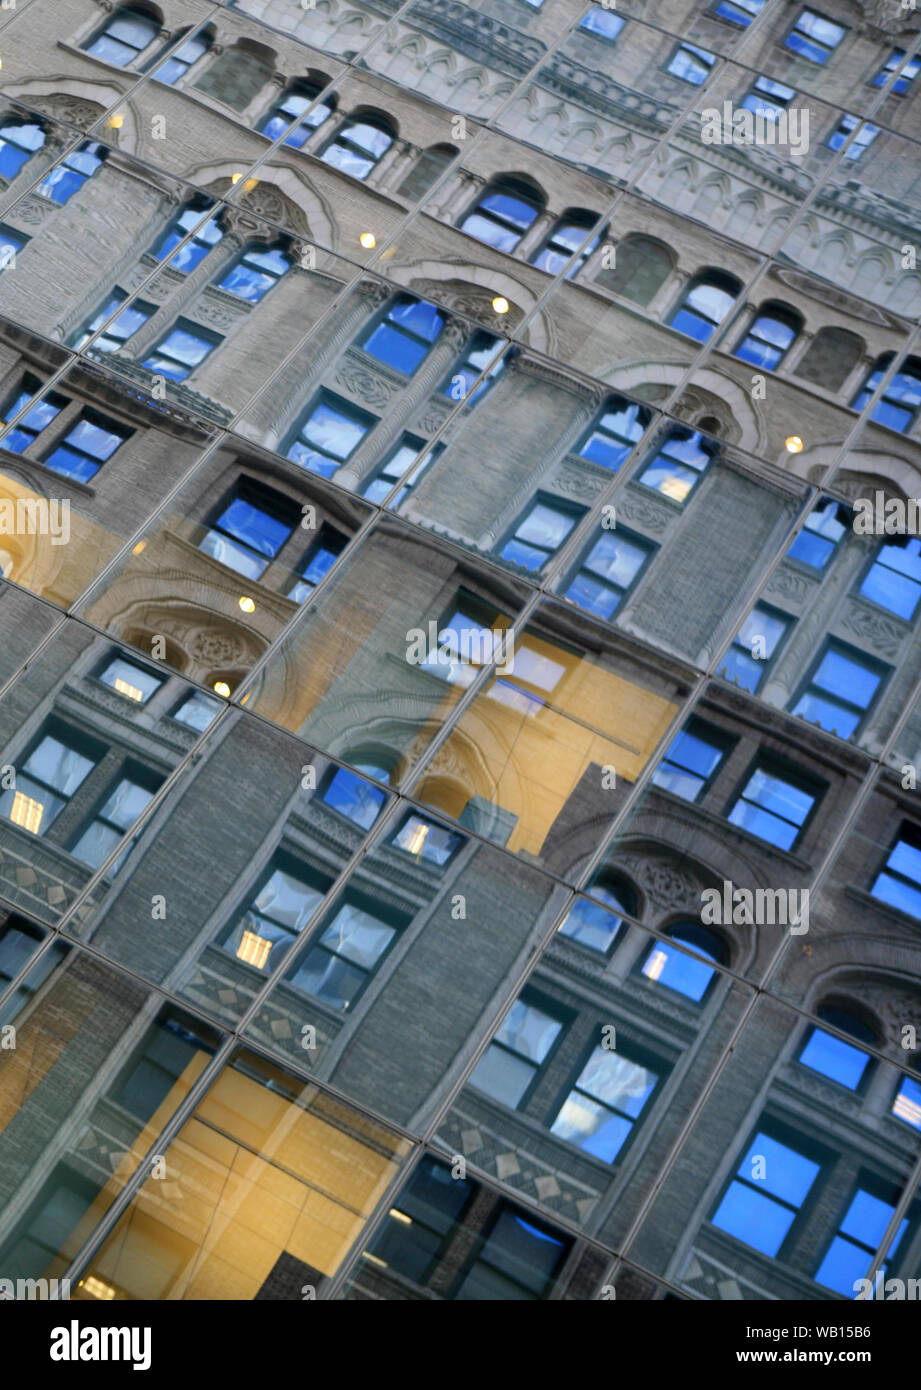 Full frame image of a manhattan office/apartment block reflected in glass frontage building across the street Stock Photo